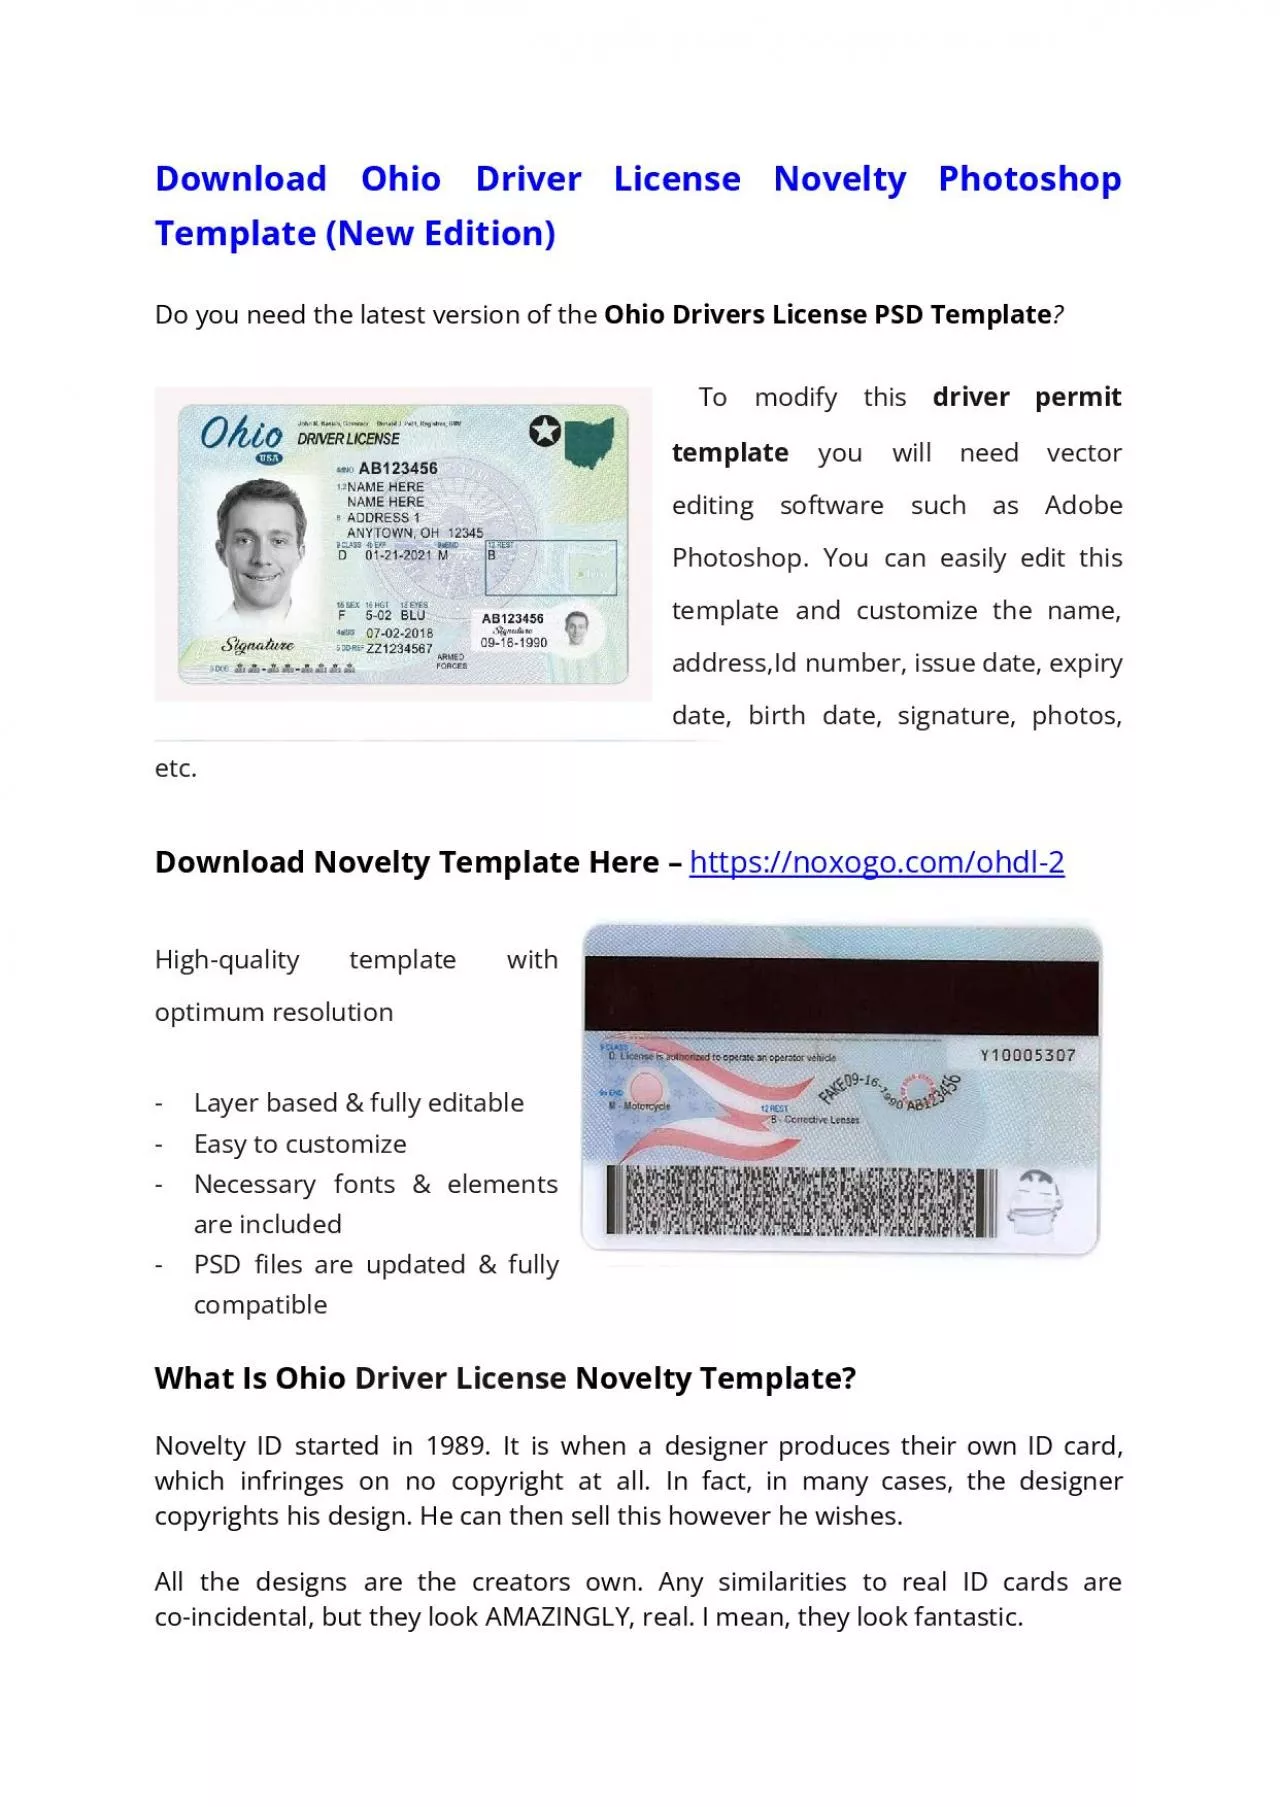 Ohio Drivers License PSD Template (New Edition) – Download Photoshop File